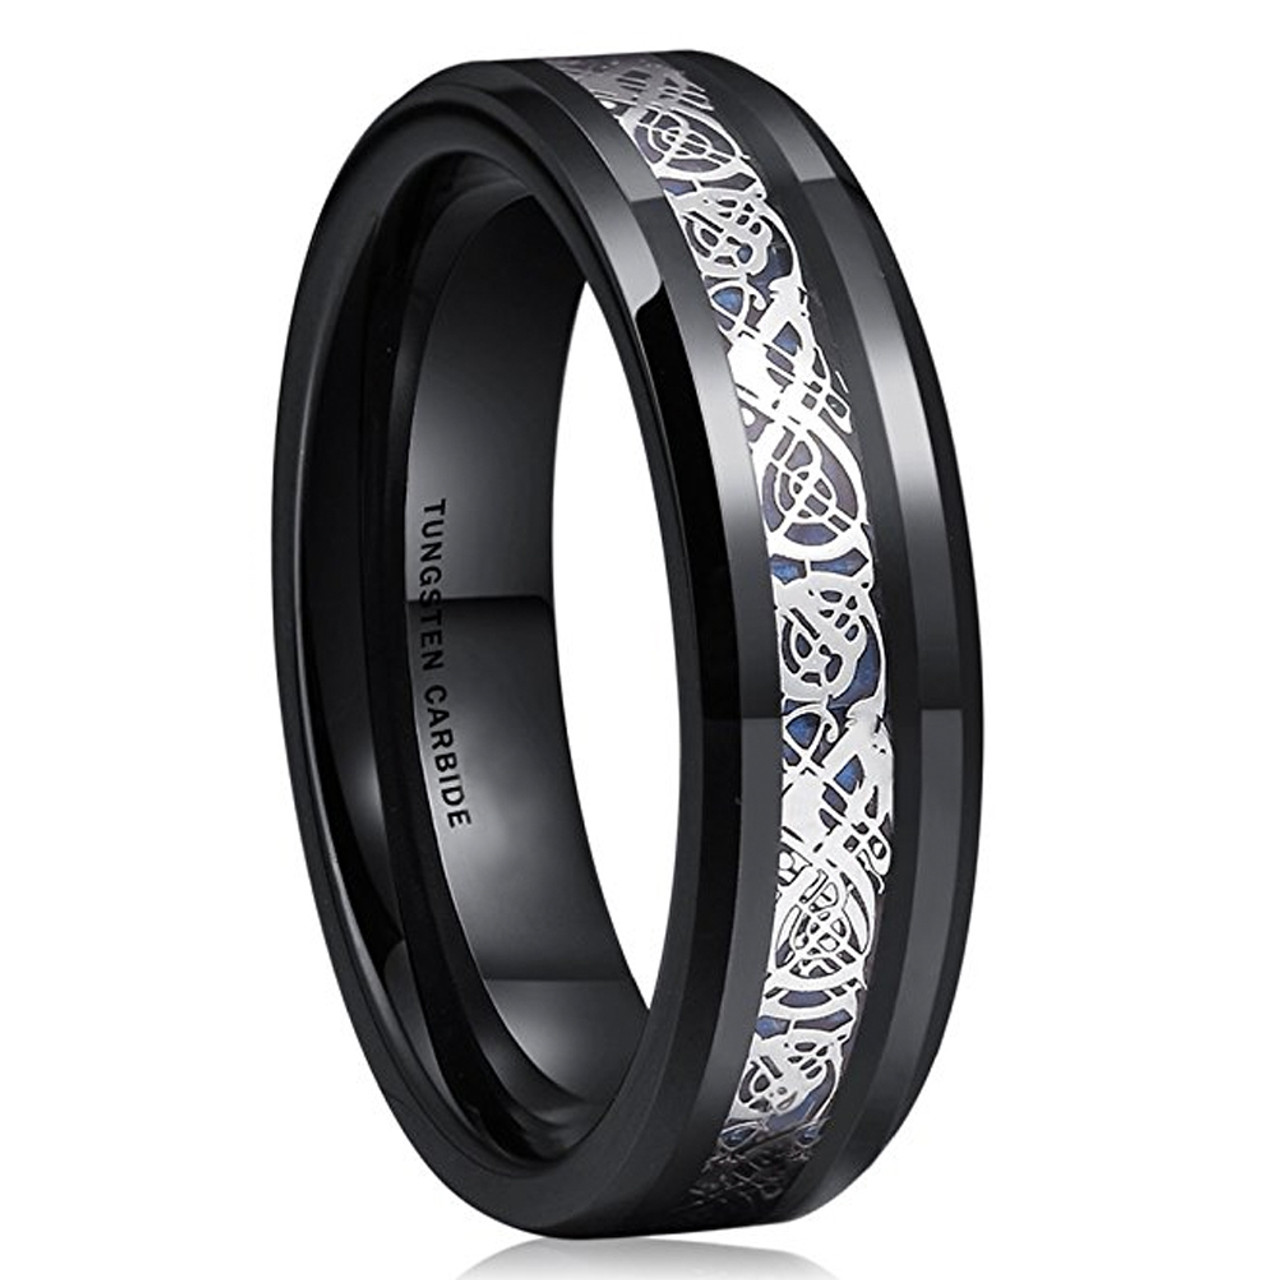 Women's Tungsten Wedding Band (6mm). Celtic Wedding Band Black with Silver and Blue Resin Inlay. Celtic Knot Tungsten Carbide Ring